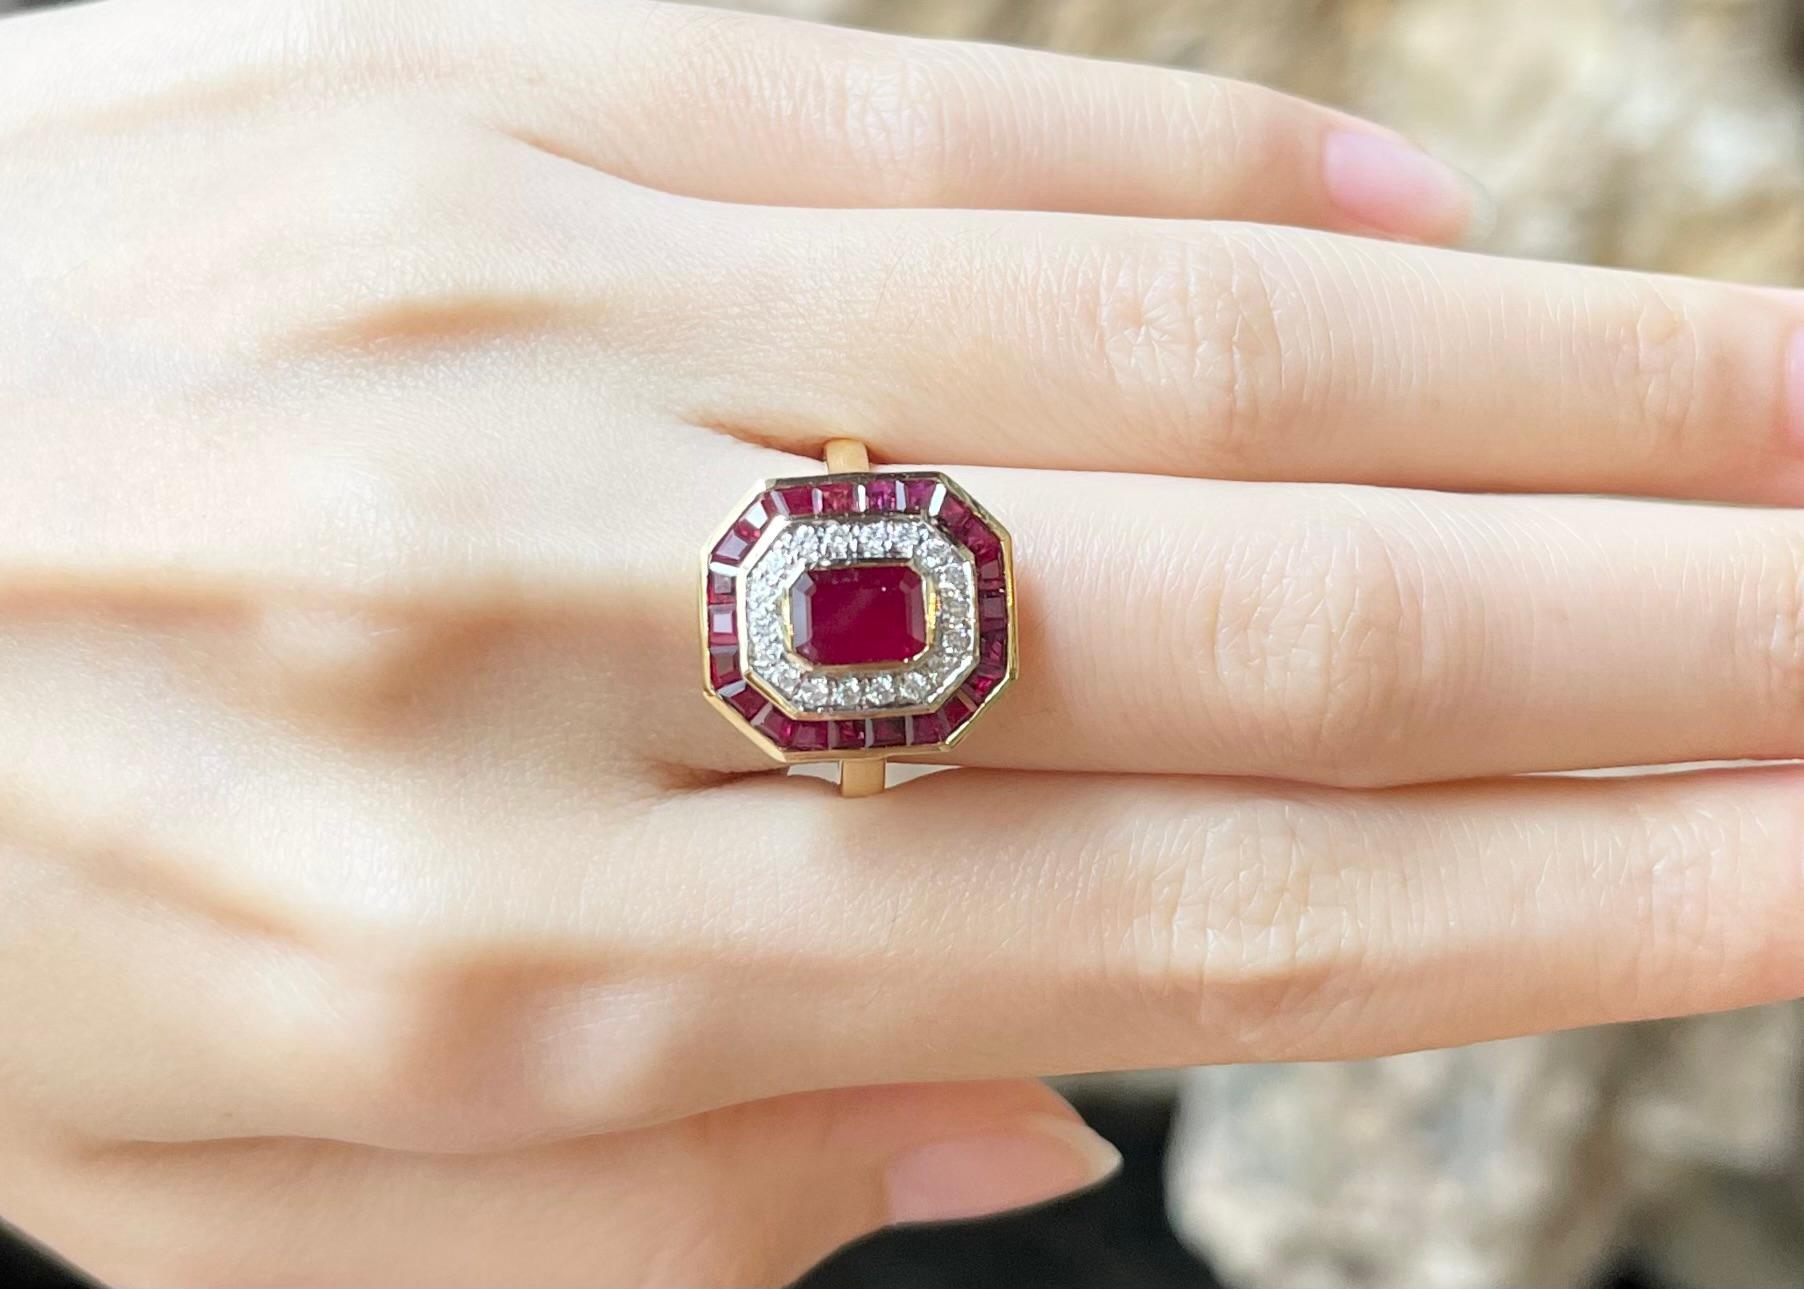 Ruby 1.10 carats, Ruby 2.52 carats and Diamond 0.19 carat Ring set in 18k Gold Settings

Width:  1.3 cm 
Length: 1.5 cm
Ring Size: 54
Total Weight: 6.13 grams

